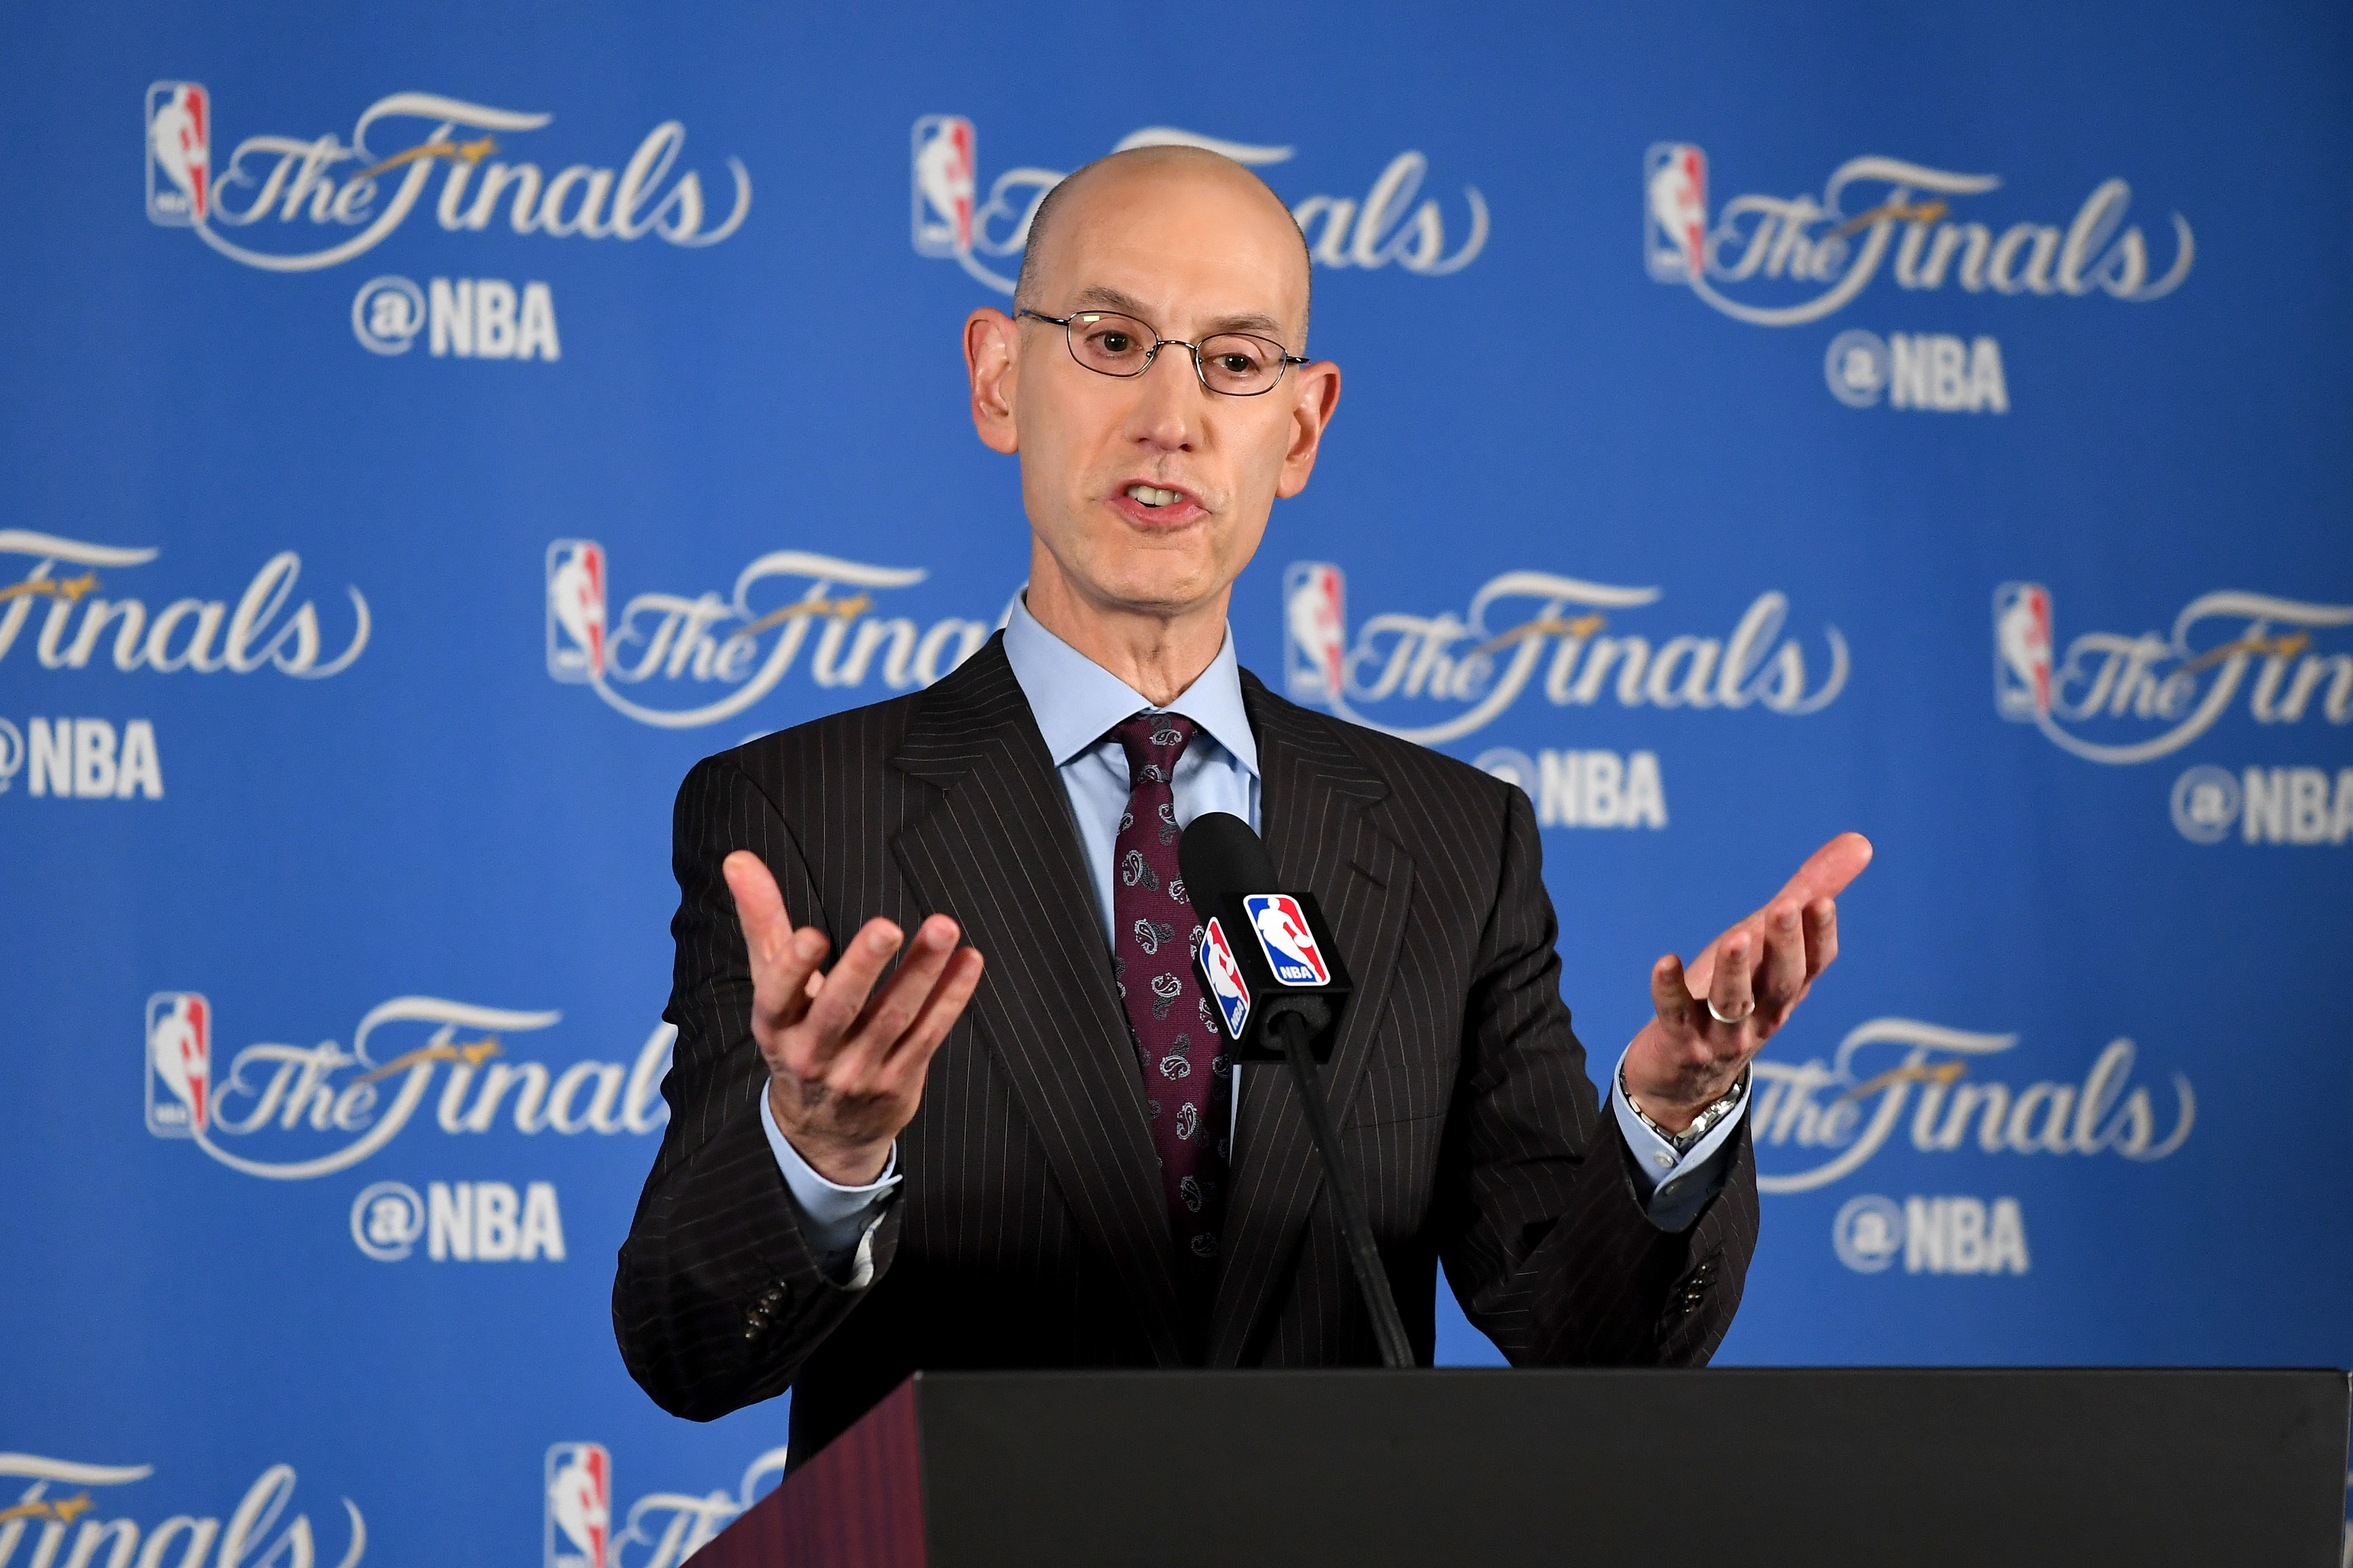 OAKLAND, CA - JUNE 02: NBA Commissioner Adam Silver addresses the media before Game 1 of the 2016 NBA Finals at ORACLE Arena on June 2, 2016 in Oakland, California. The Cleveland Cavaliers take on the Golden State Warriors in the best of seven series. NOTE TO USER: User expressly acknowledges and agrees that, by downloading and or using this photograph, User is consenting to the terms and conditions of the Getty Images License Agreement.   Thearon W. Henderson/Getty Images/AFP